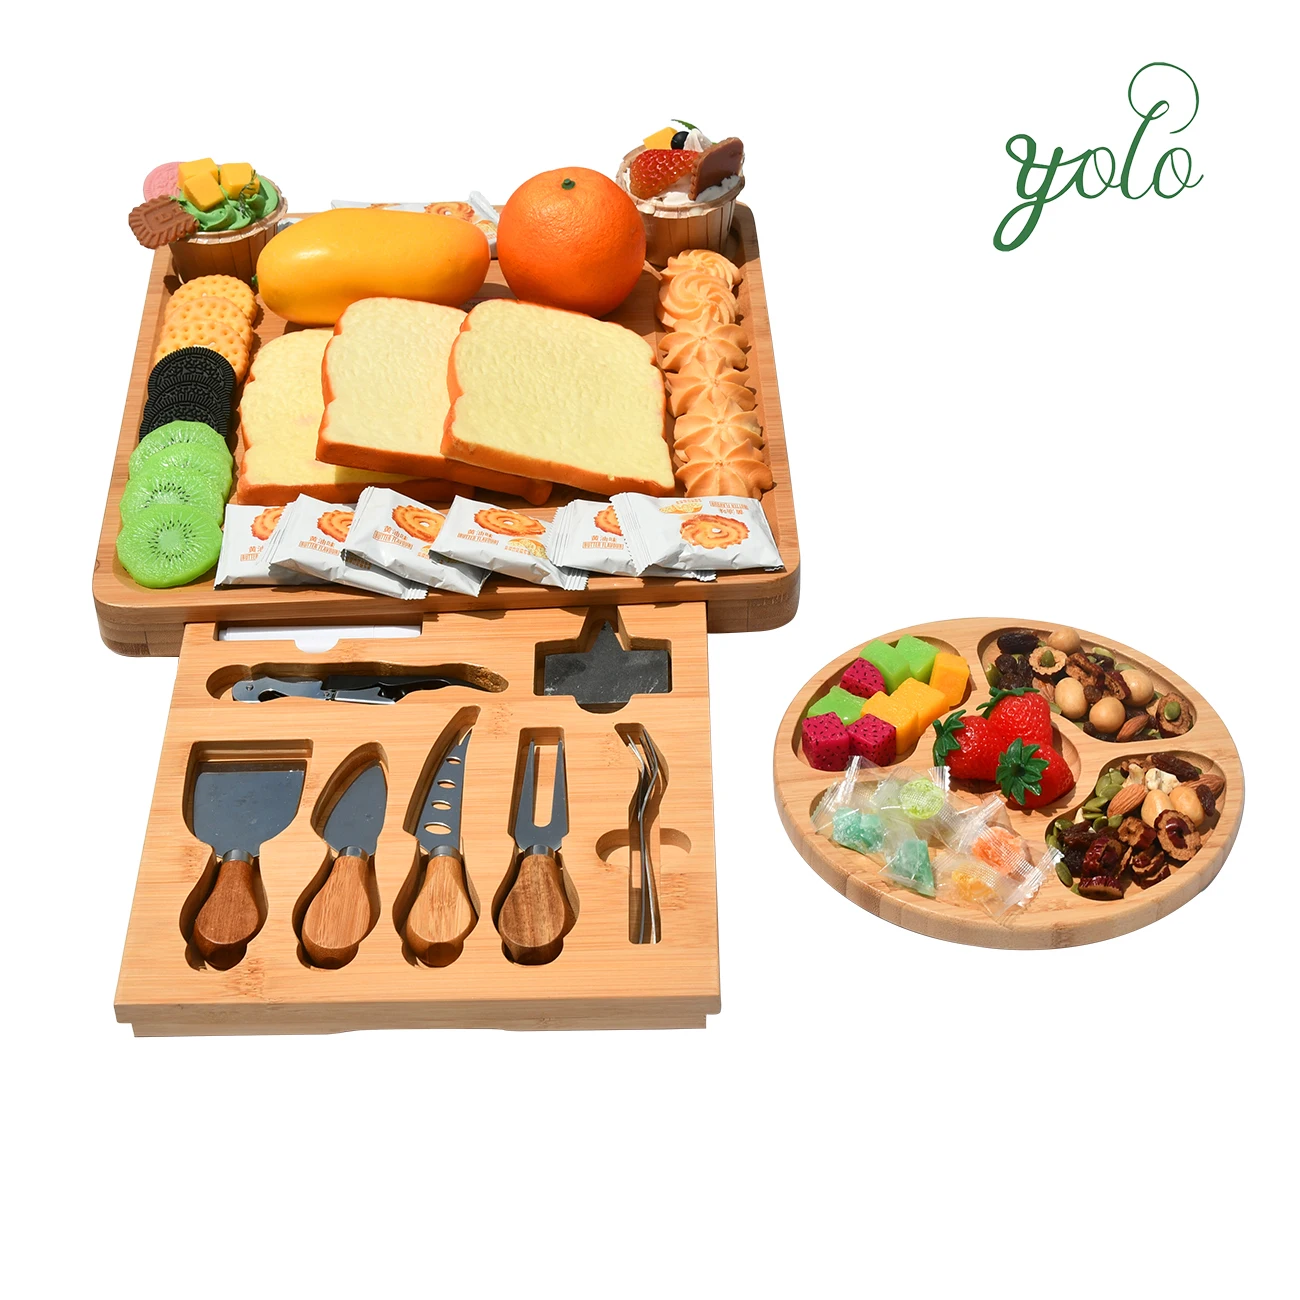 Superior Living Edge Wood Charcuterie Board & Cheese Platter Set With Slide-Out Drawers For Home & Kitchen